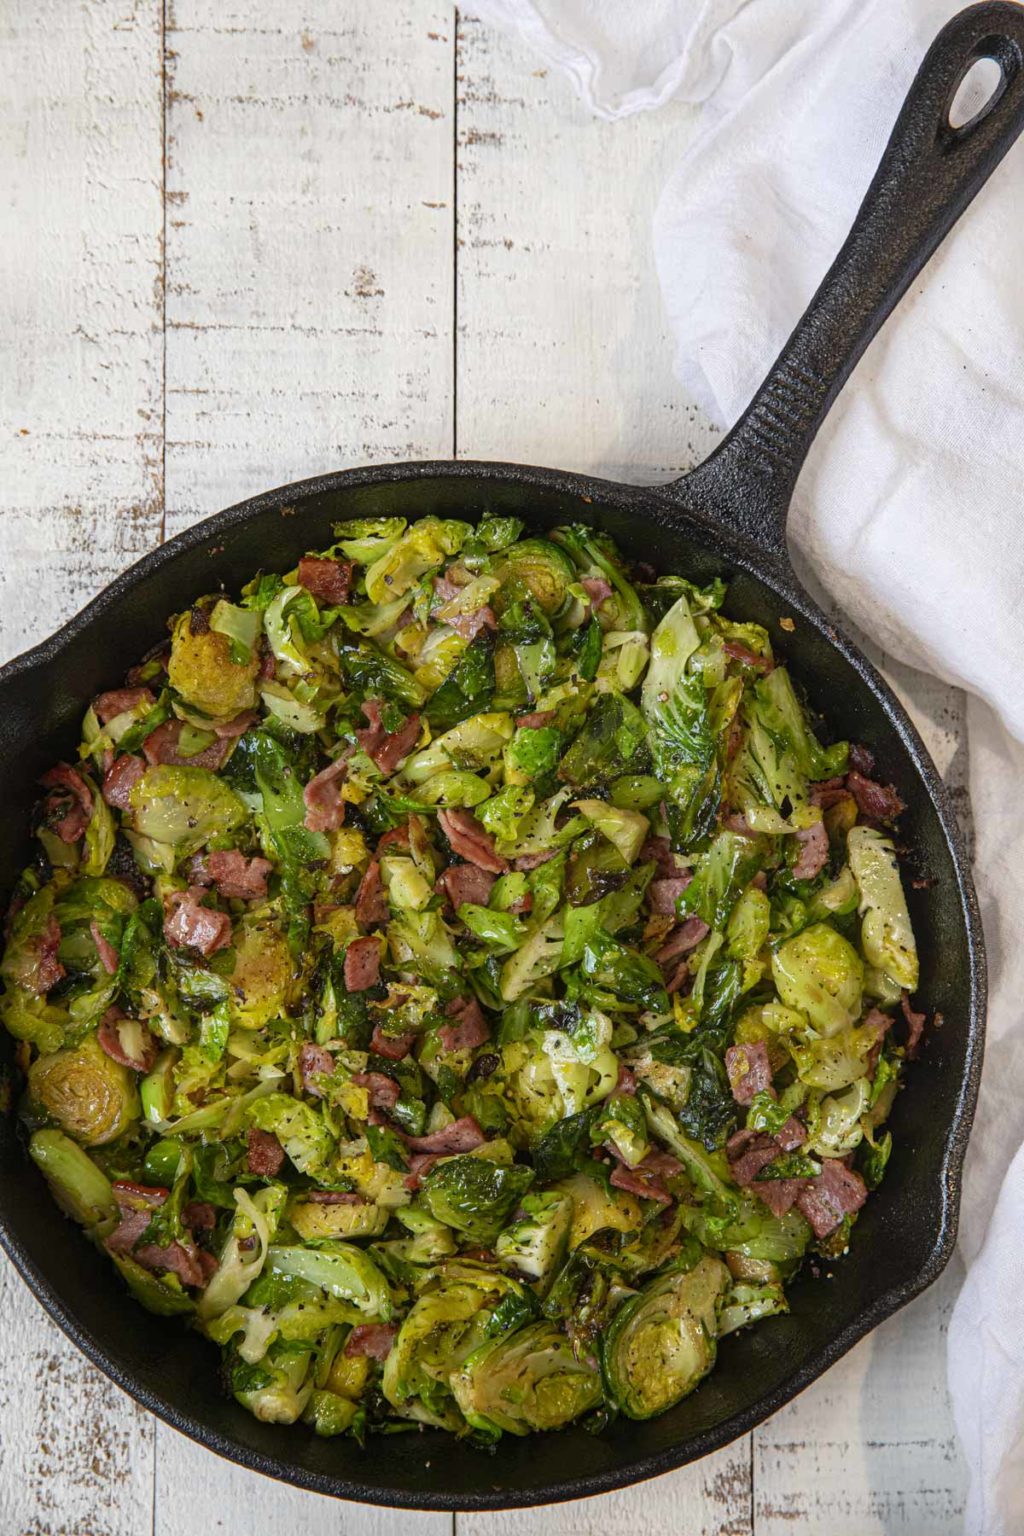 Turkey Bacon Brussels Sprouts - Cooking Made Healthy